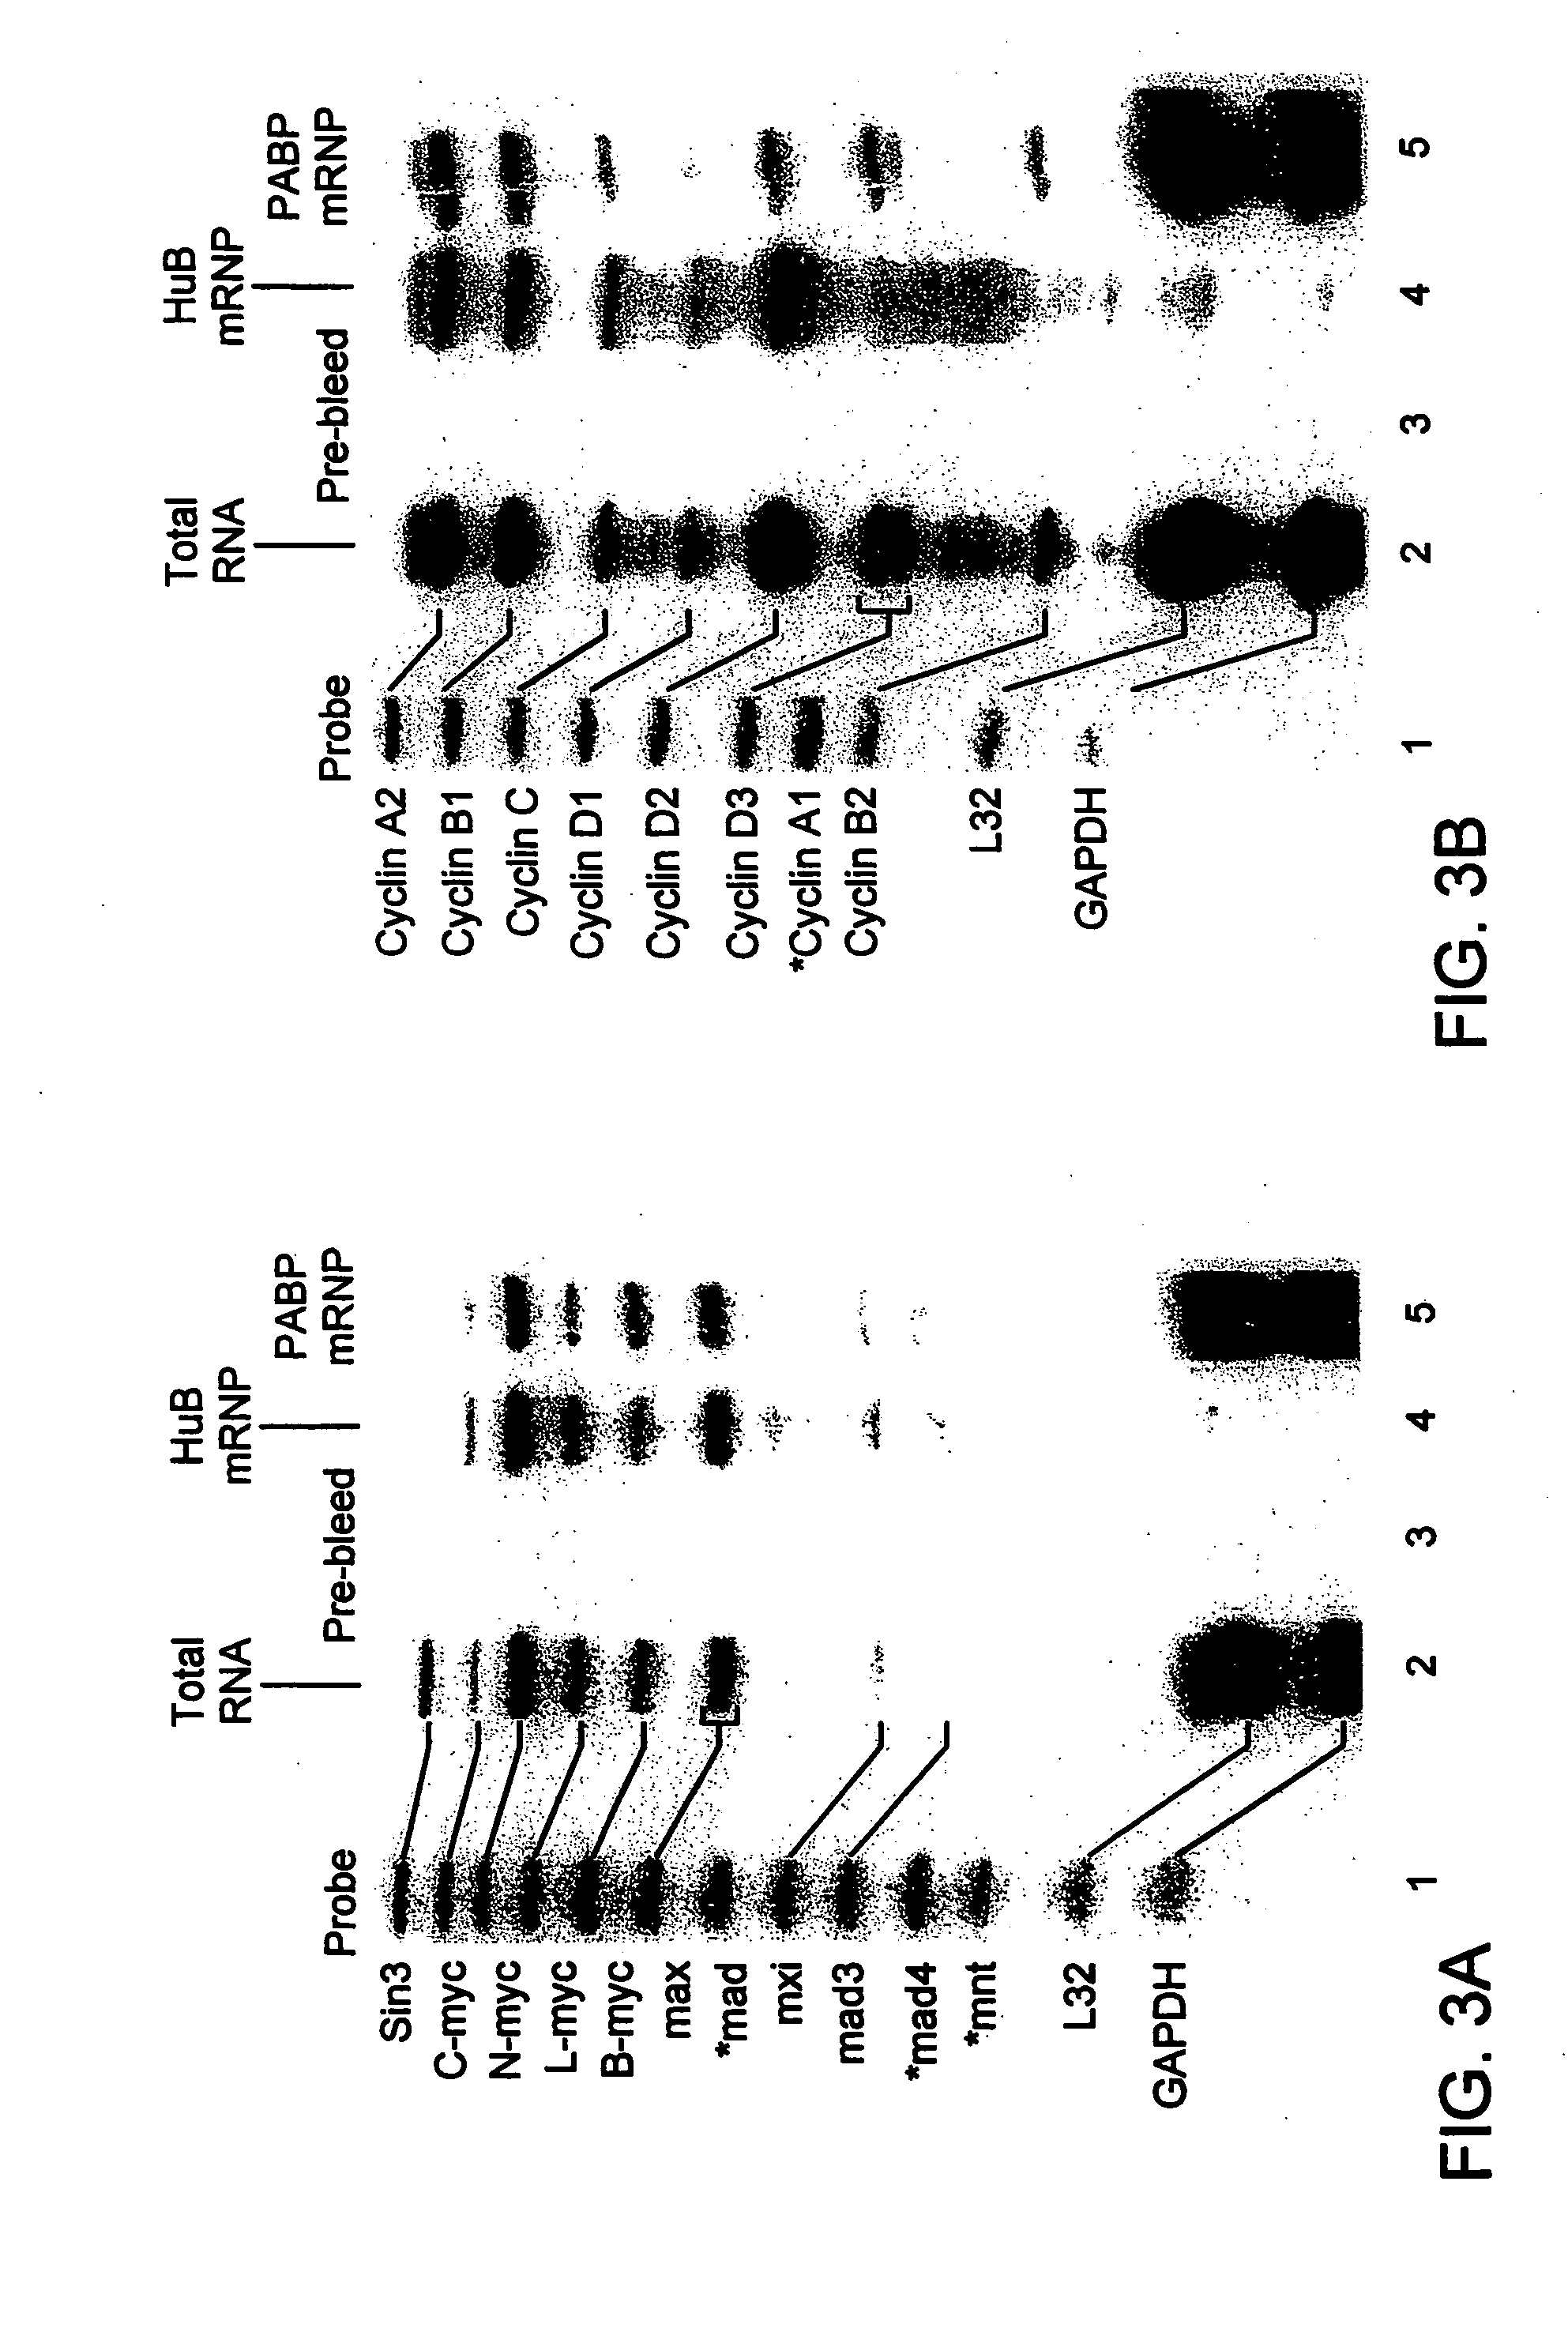 Methods for isolating and characterizing endogenous mRNA-protein (mRNP) complexes